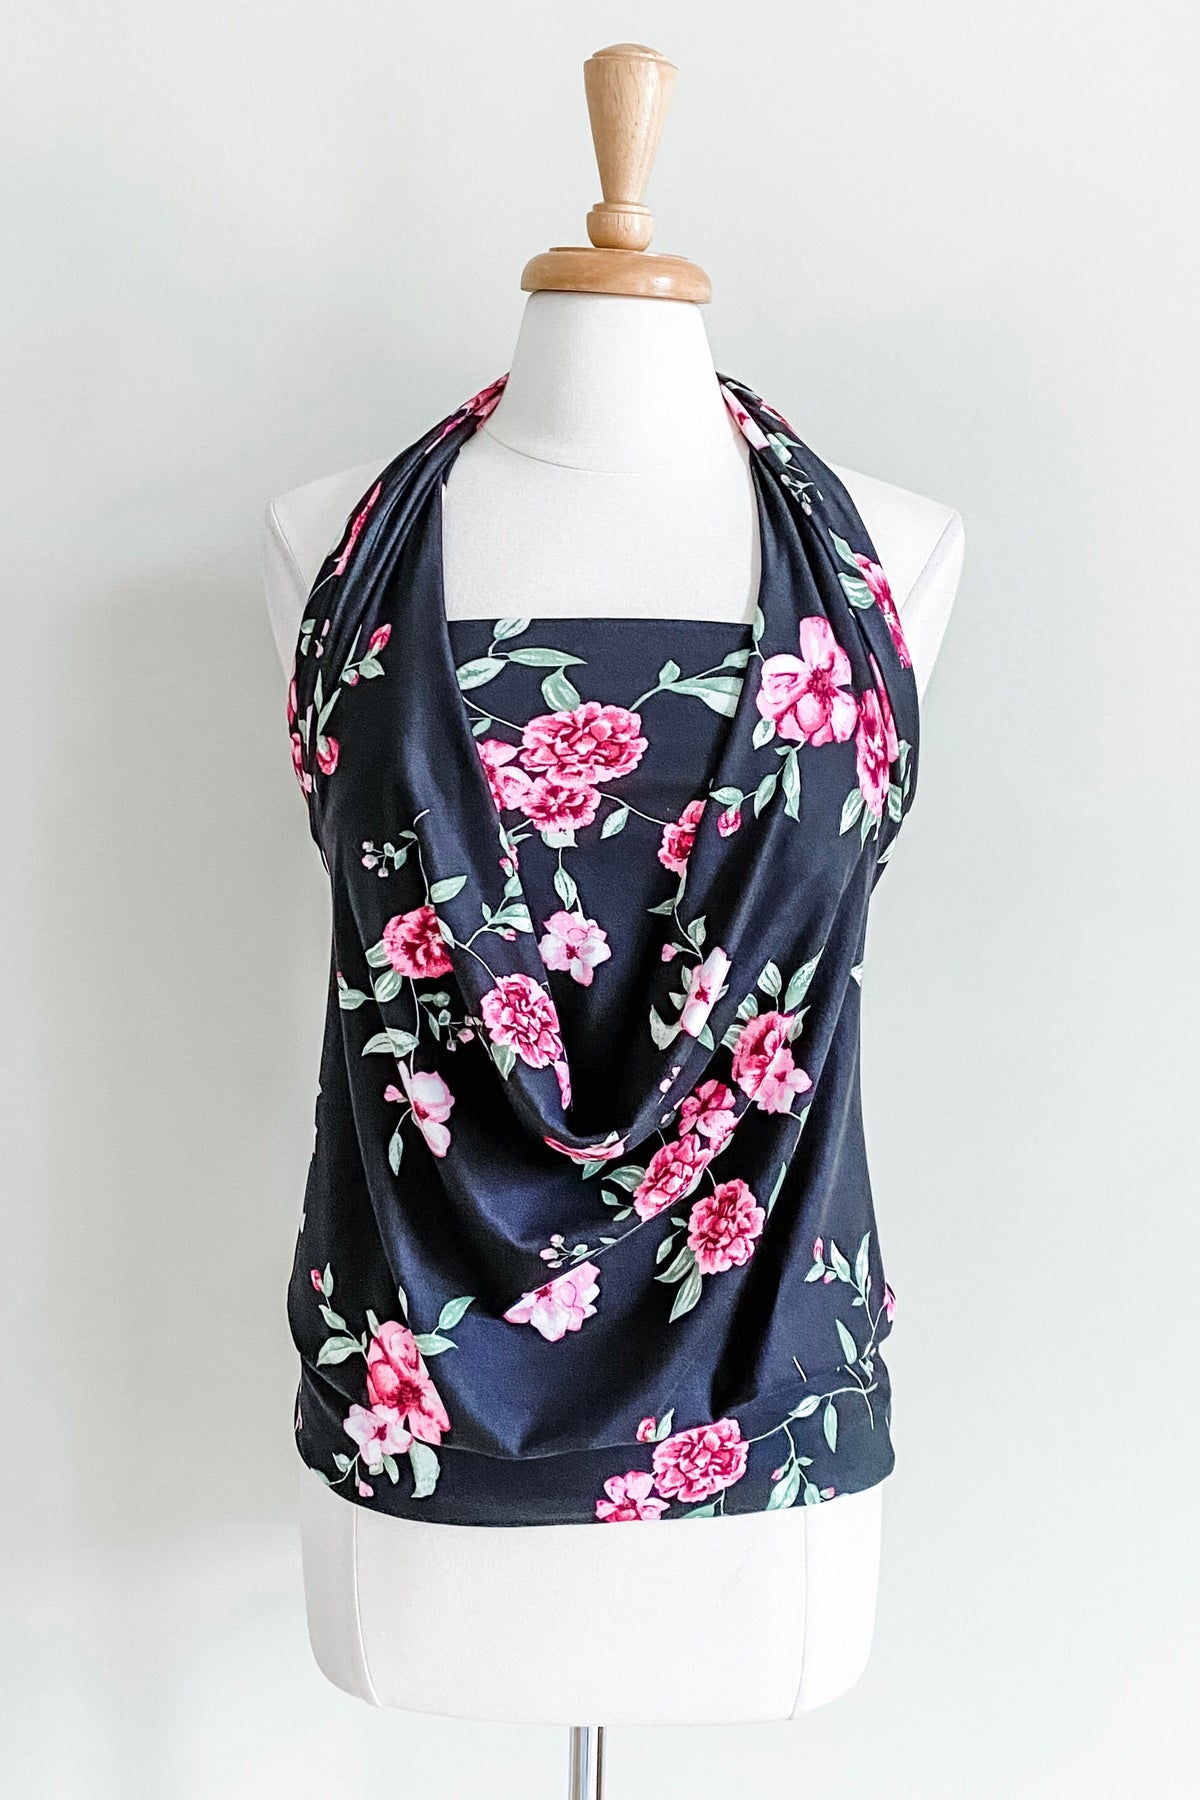 Diane Kroe One-4-All Top (Black Pink Floral) - Warm Weather Capsule Collection 